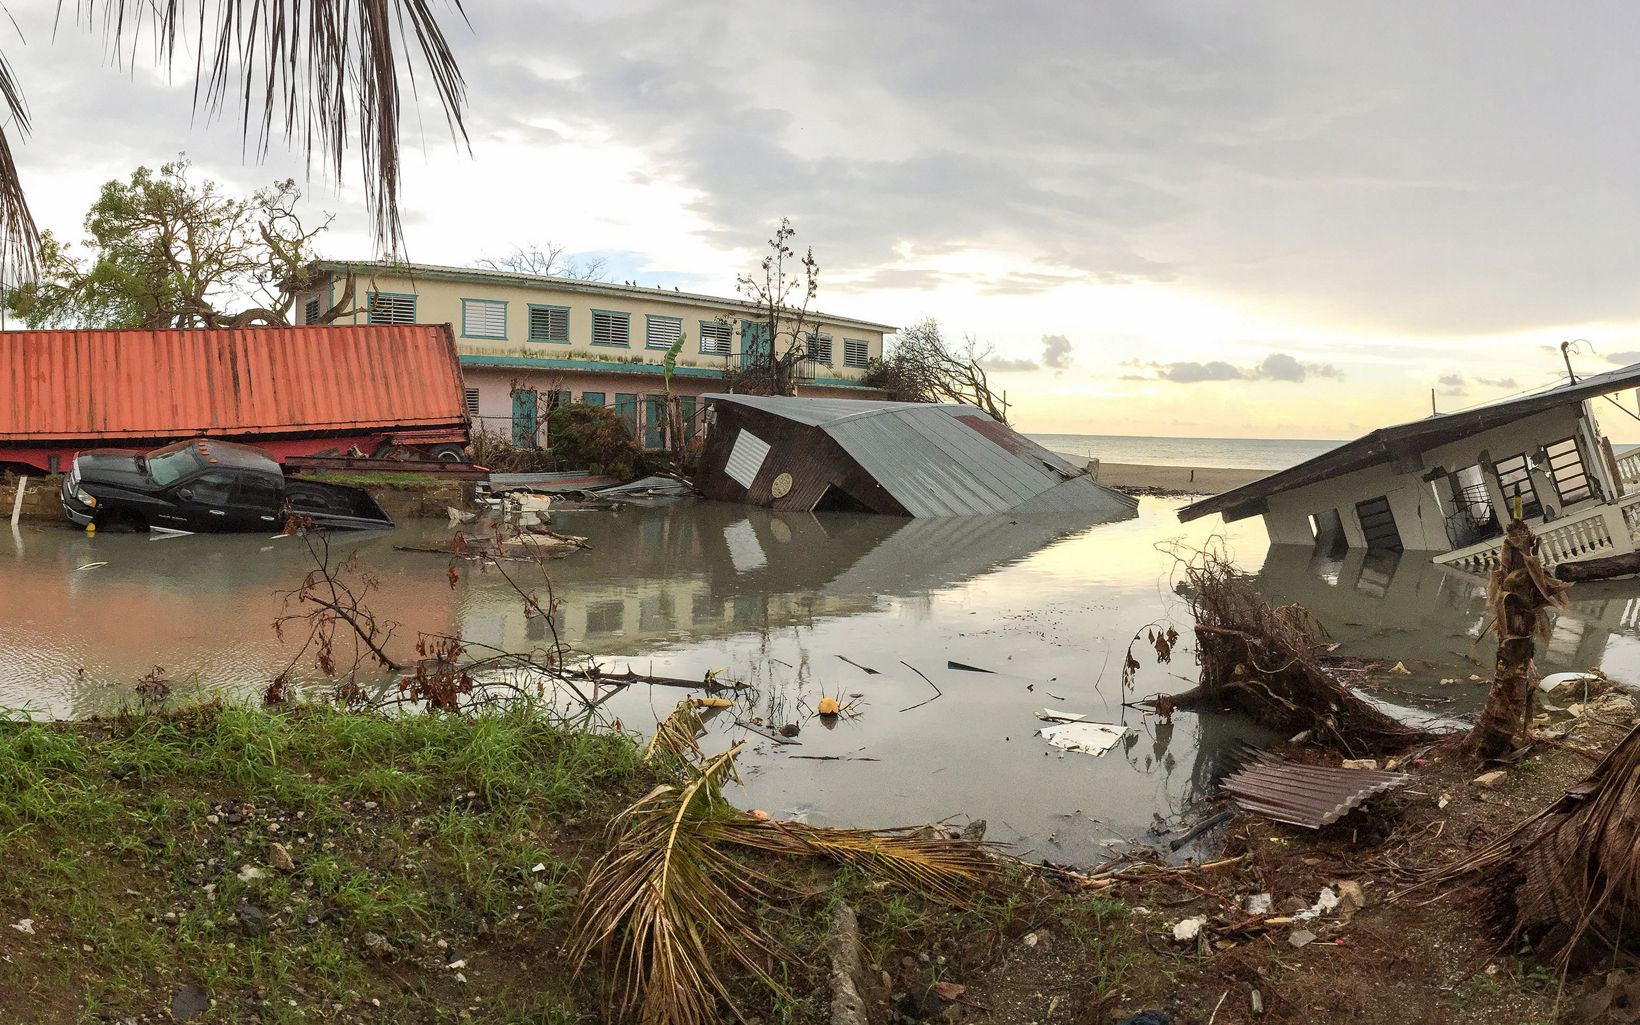 Damaged homes in Puerto Rico sink in elevated waters after Hurricane Maria.